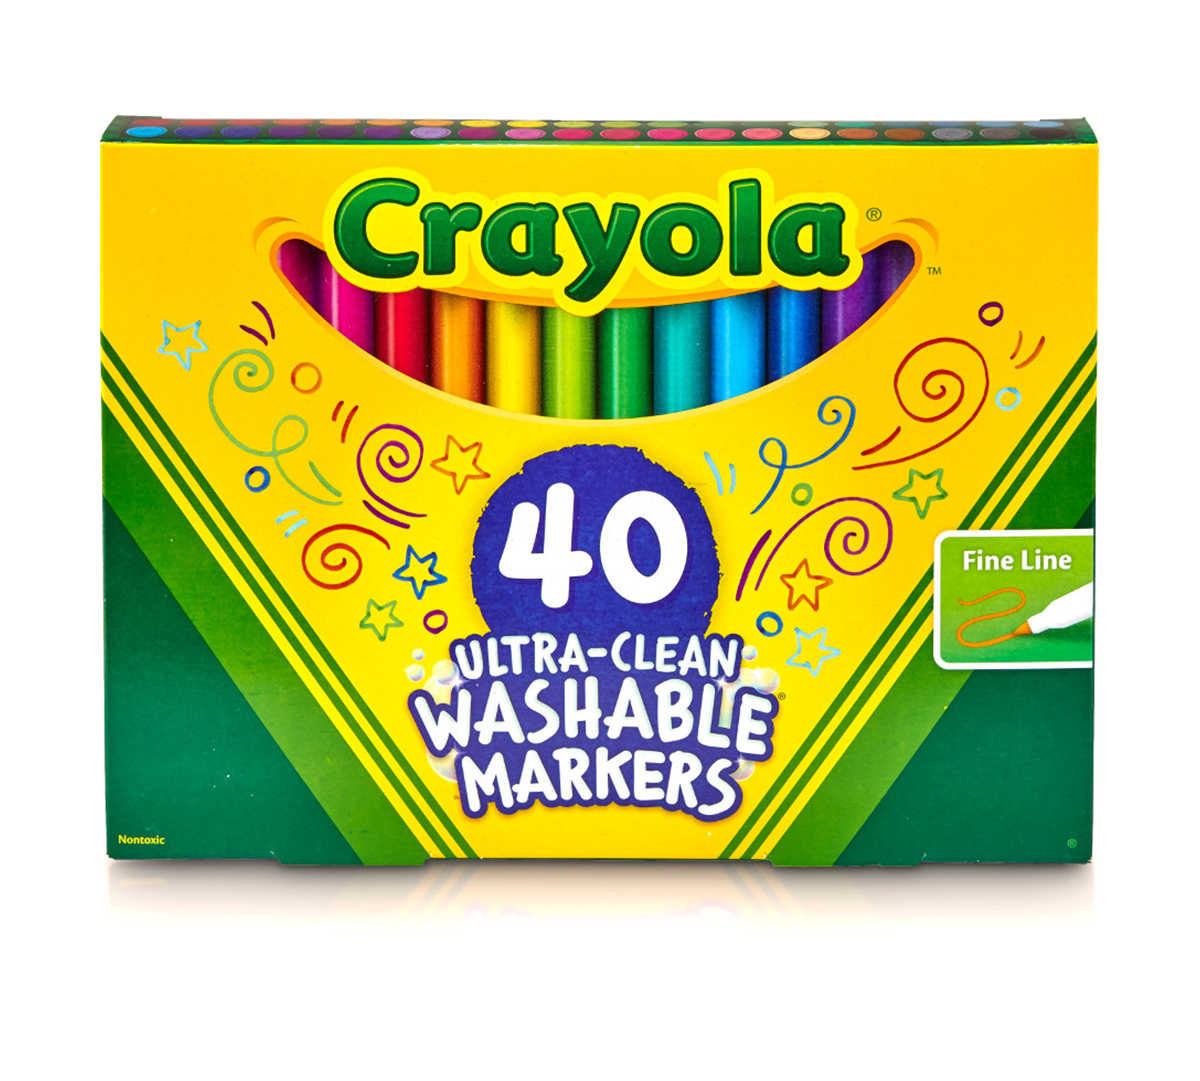 Crayola Super Tips Washable Markers 40 Pack